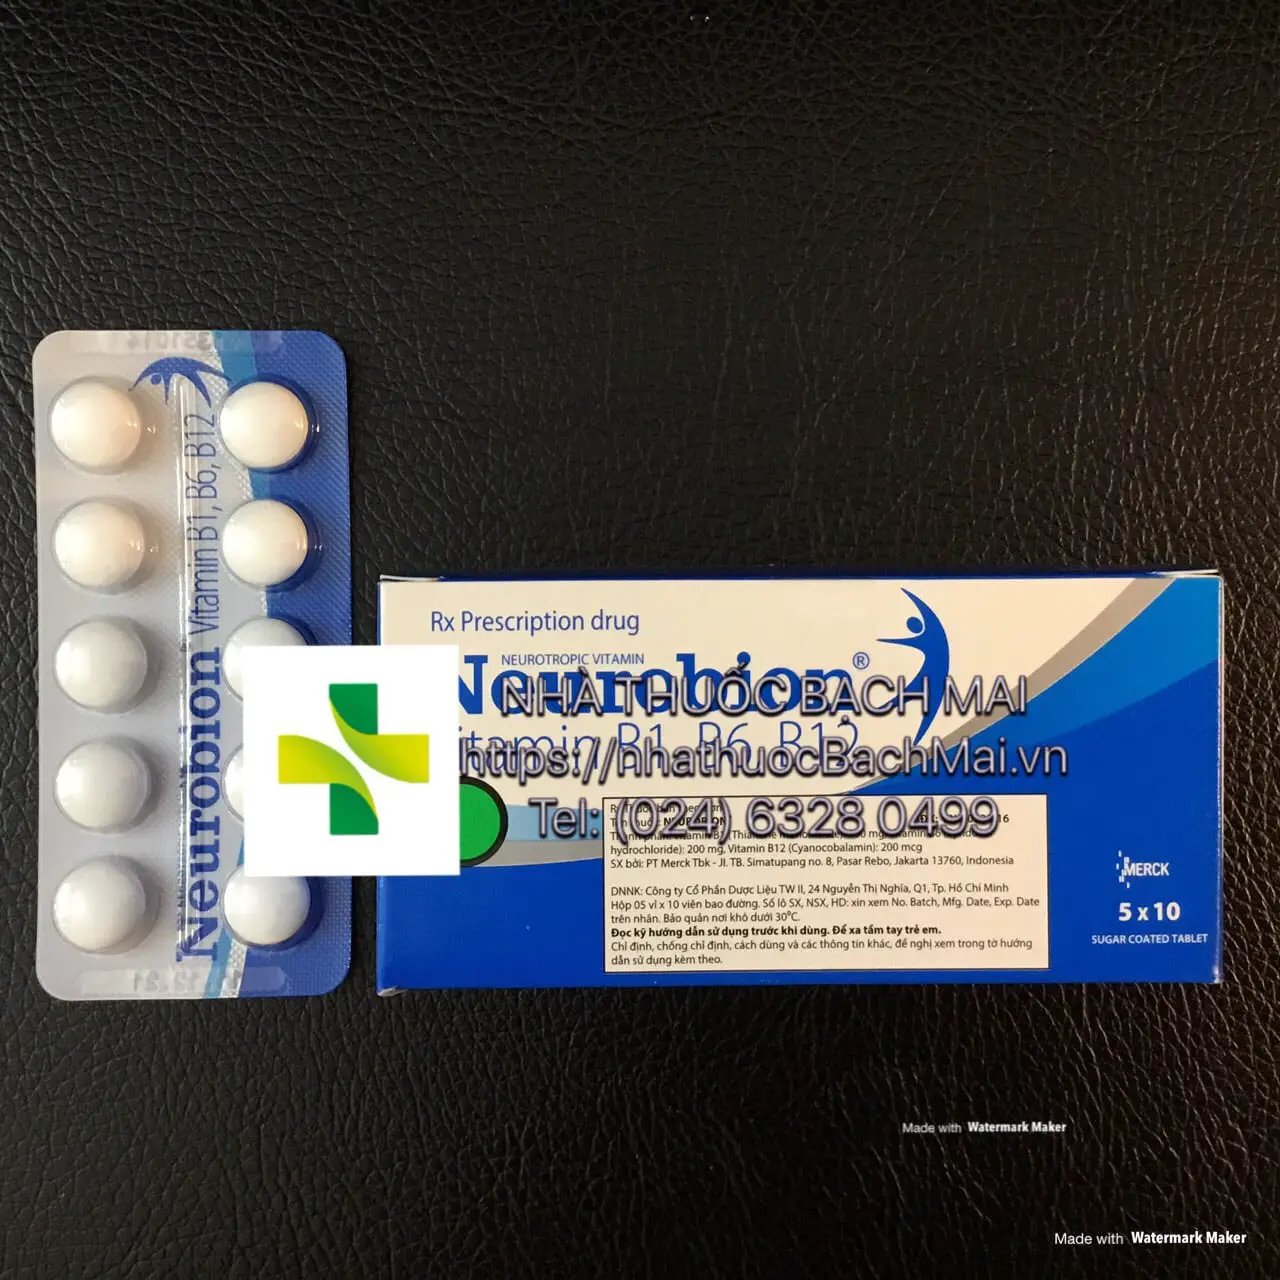 Clomid : Clomid 50Mg Best Price, Clomid And Nolvadex Only Cycle, Where ...